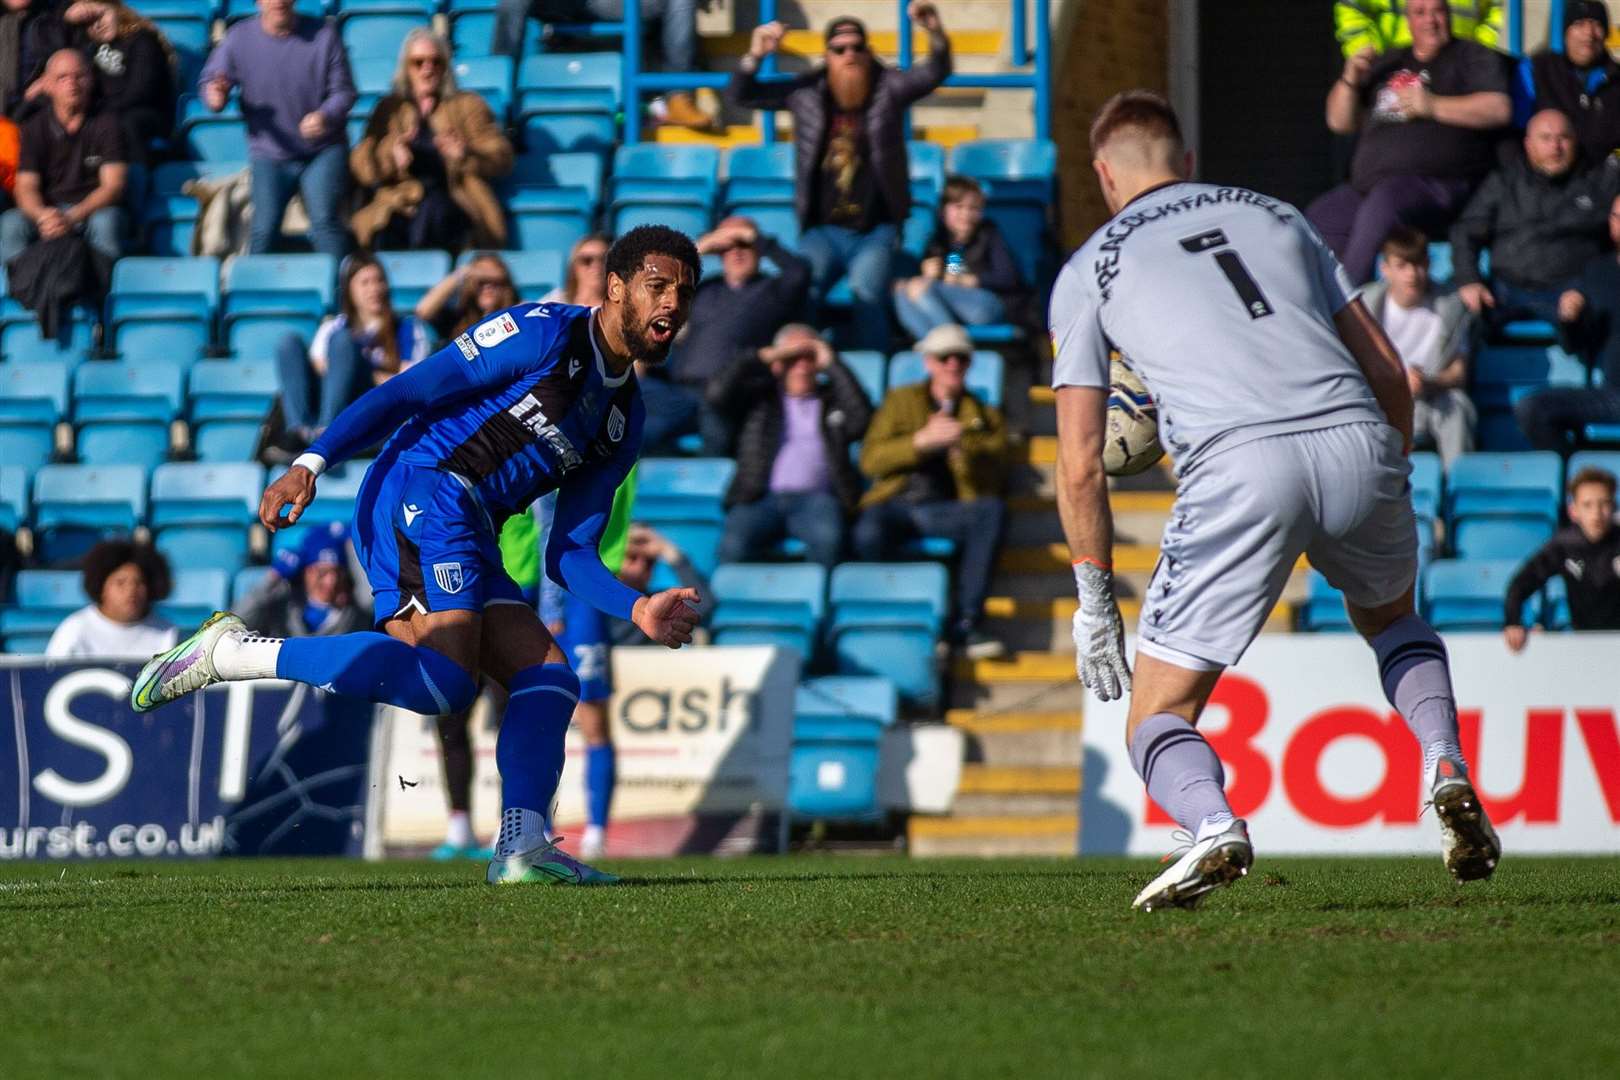 Vadaine Oliver with a chance at goal against Sheffield Wednesday. Picture: KPI